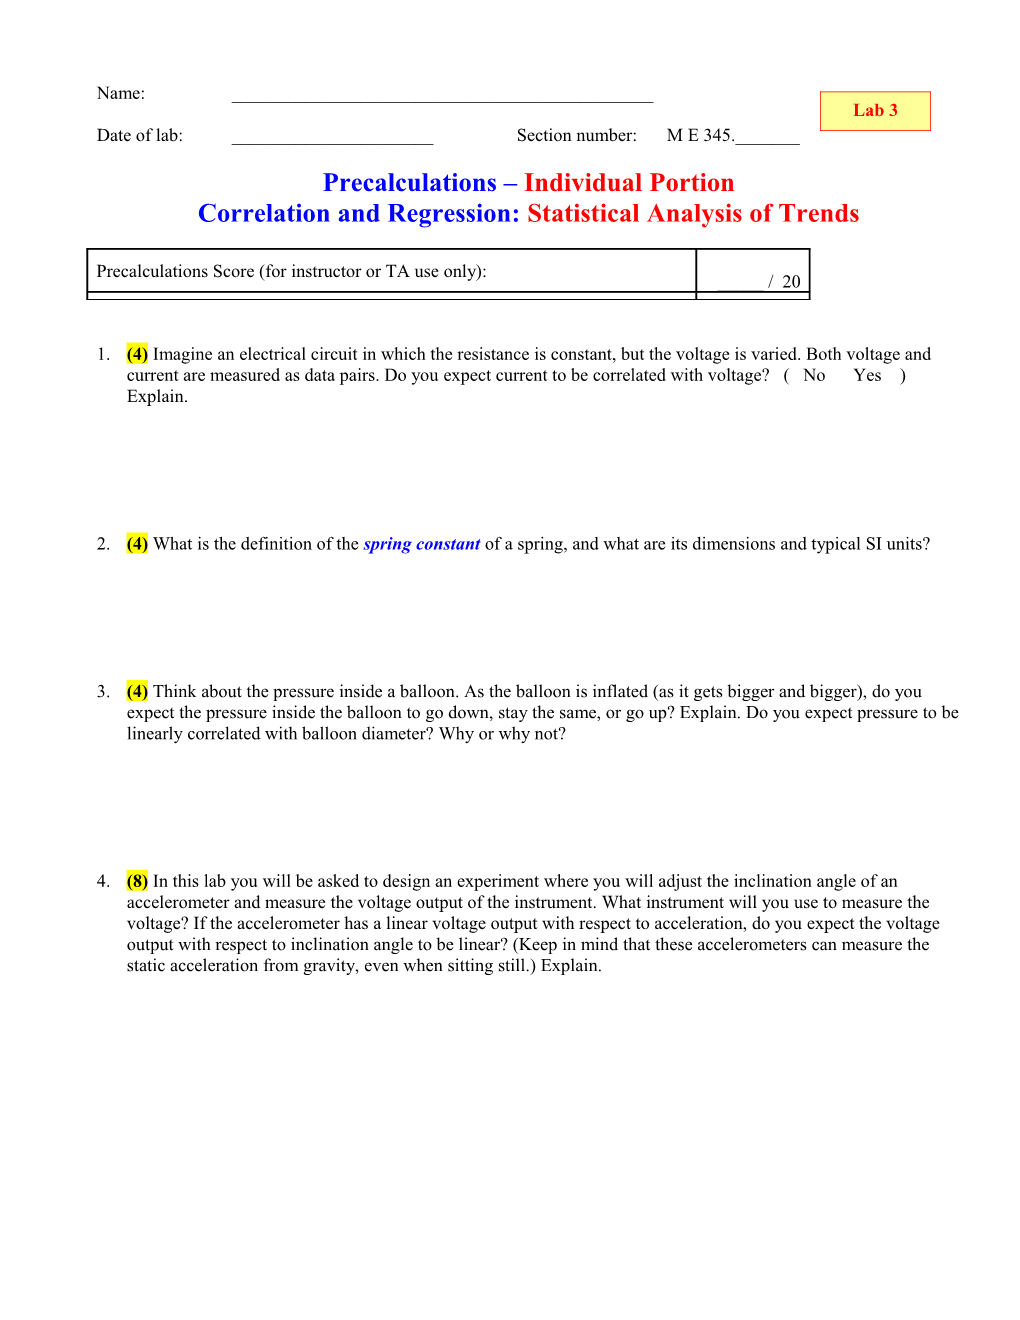 Cover Page for Precalculations Individual Portion s2